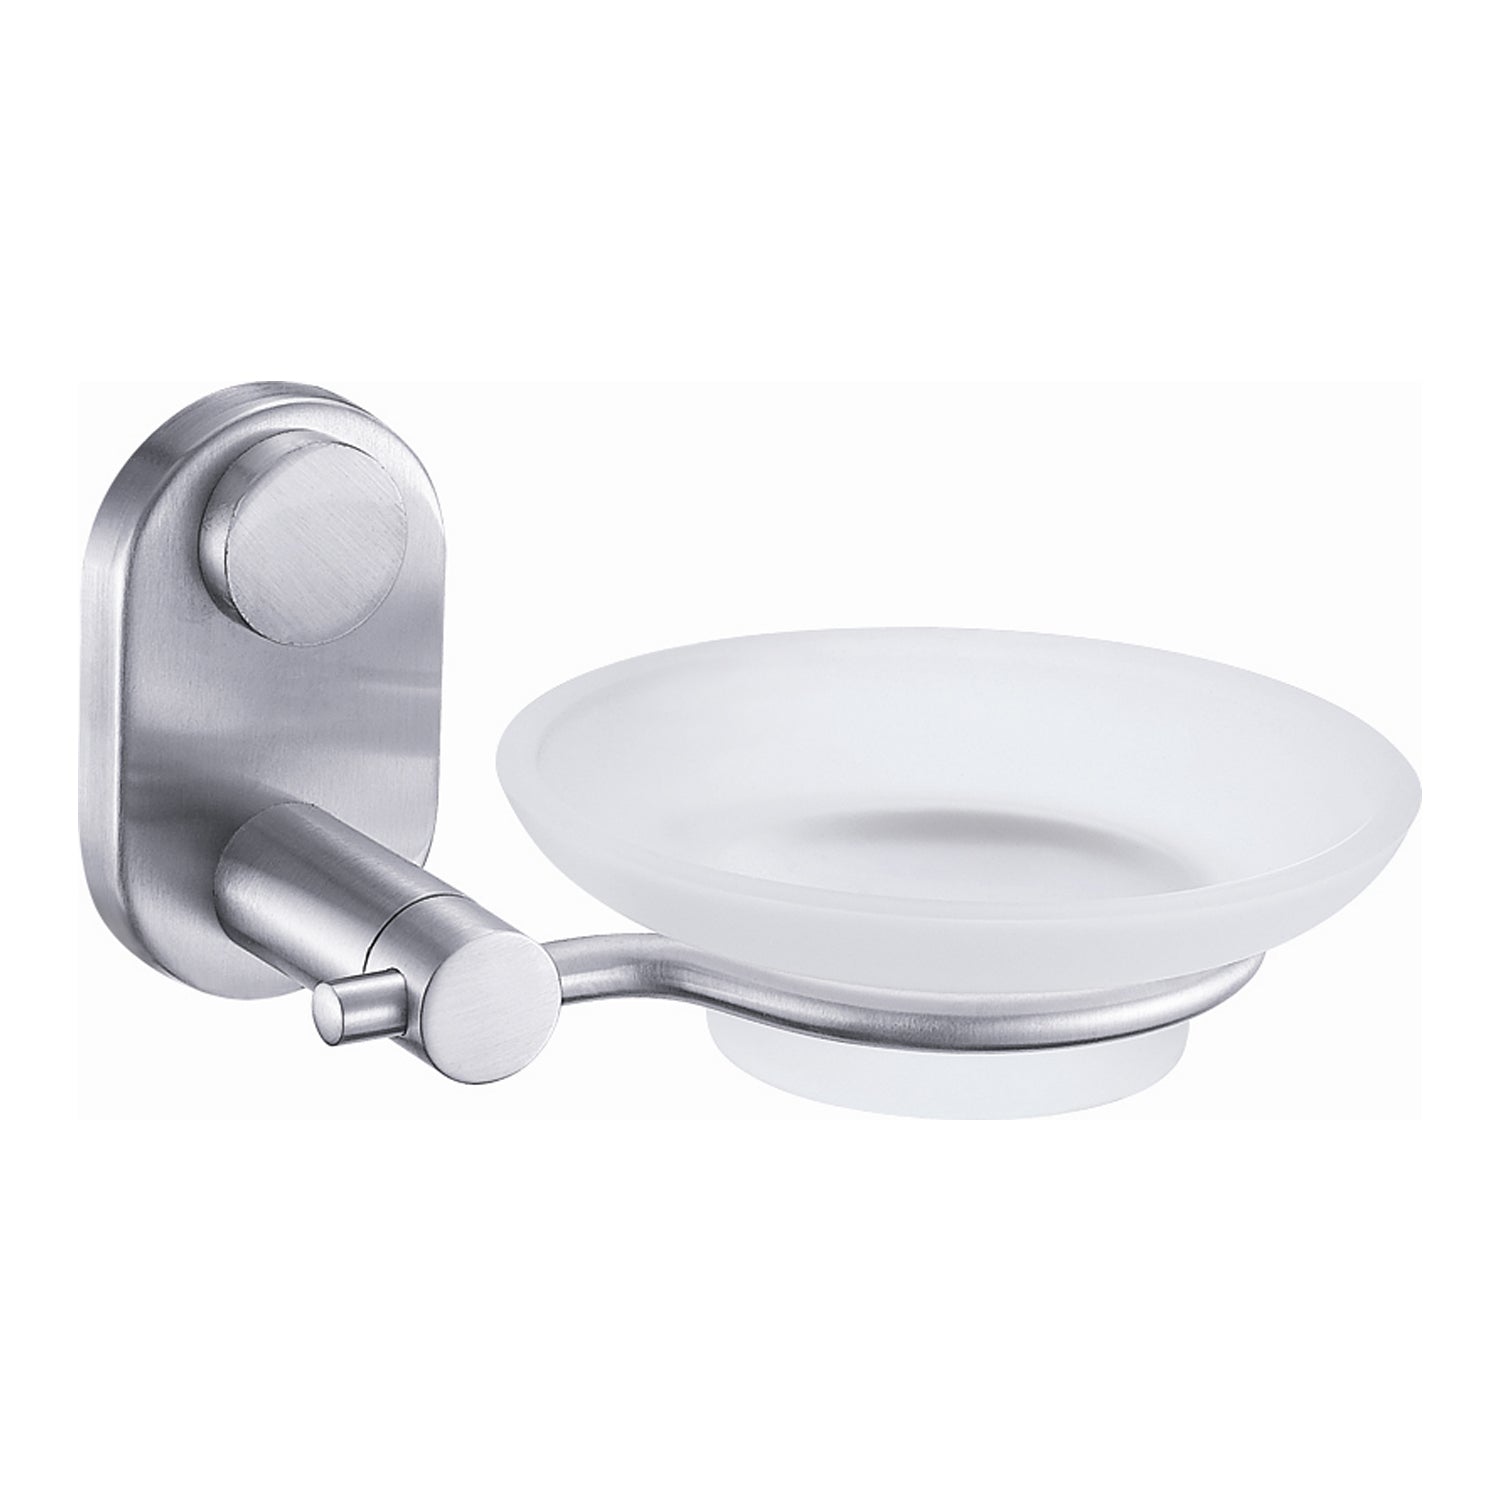 DAX Stainless Steel Soap Dish, Wall Mount with Glass Tray, Satin Finish, 4-1/2 x 5-1/2 x 2-13/16 Inches (DAX-G0205-S)